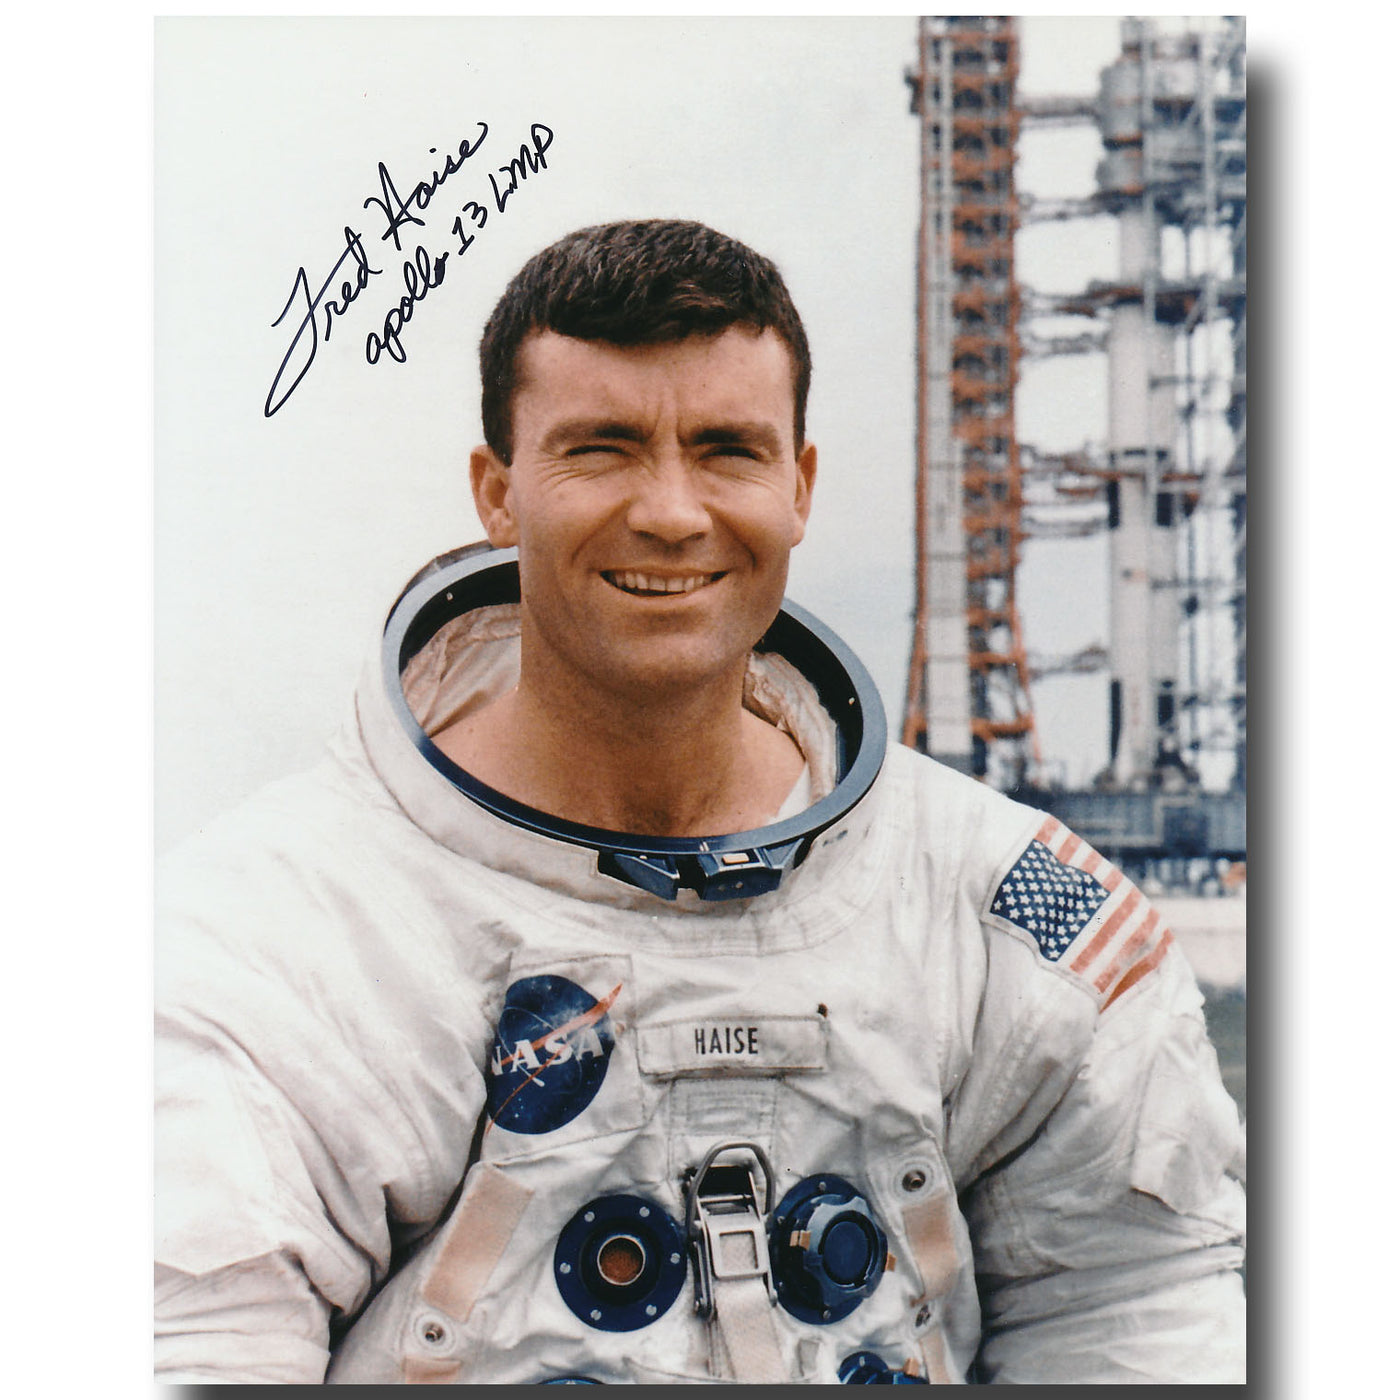 Fred Haise – handsigned 8x10 Saturn 5 glossy photo